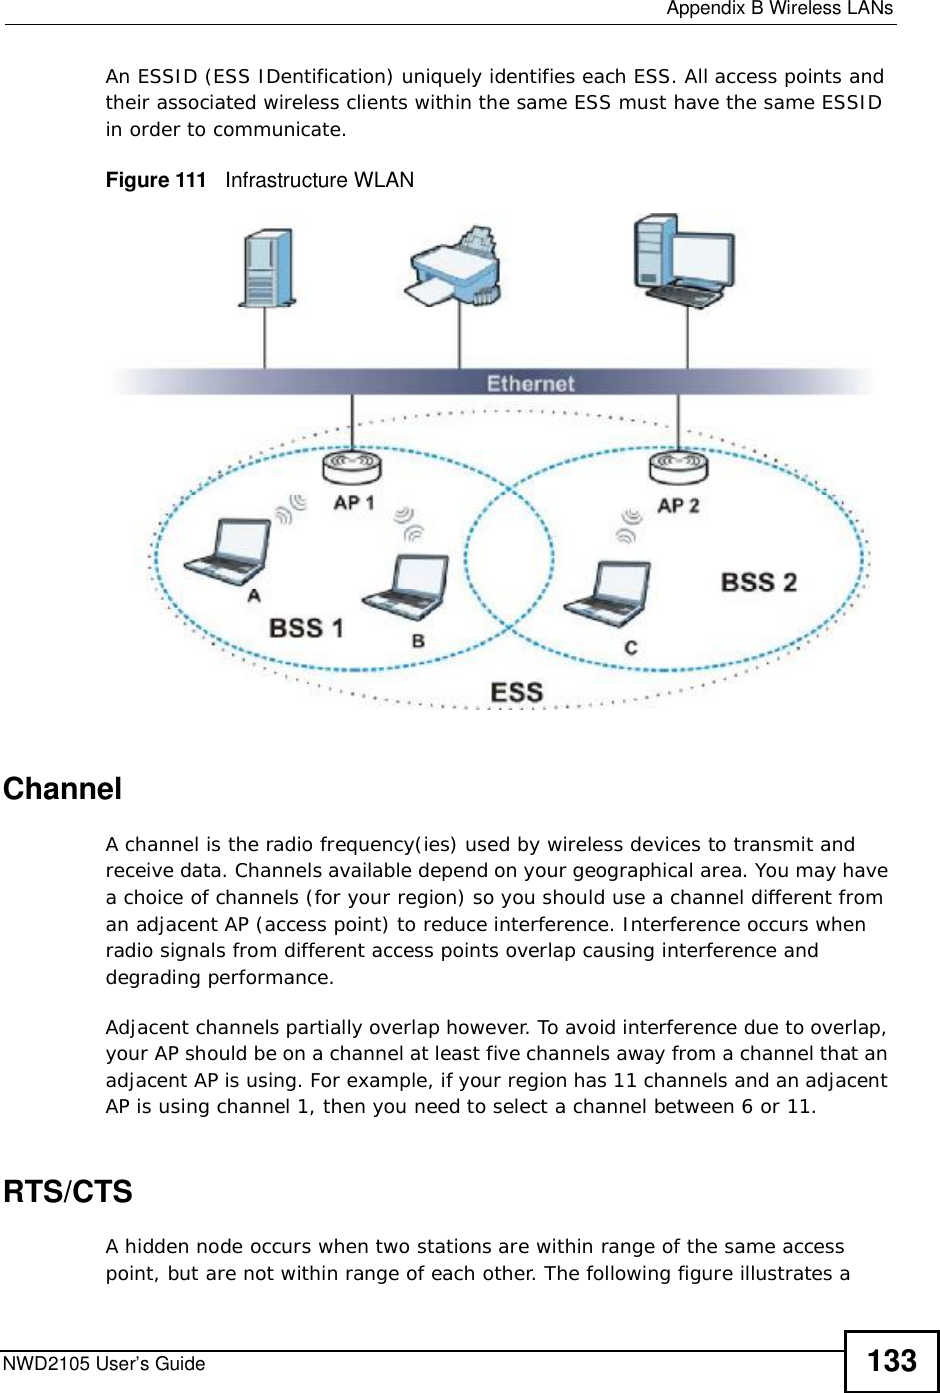  Appendix BWireless LANsNWD2105 User’s Guide 133An ESSID (ESS IDentification) uniquely identifies each ESS. All access points and their associated wireless clients within the same ESS must have the same ESSID in order to communicate.Figure 111   Infrastructure WLANChannelA channel is the radio frequency(ies) used by wireless devices to transmit and receive data. Channels available depend on your geographical area. You may have a choice of channels (for your region) so you should use a channel different from an adjacent AP (access point) to reduce interference. Interference occurs when radio signals from different access points overlap causing interference and degrading performance.Adjacent channels partially overlap however. To avoid interference due to overlap, your AP should be on a channel at least five channels away from a channel that an adjacent AP is using. For example, if your region has 11 channels and an adjacent AP is using channel 1, then you need to select a channel between 6 or 11.RTS/CTSA hidden node occurs when two stations are within range of the same access point, but are not within range of each other. The following figure illustrates a 